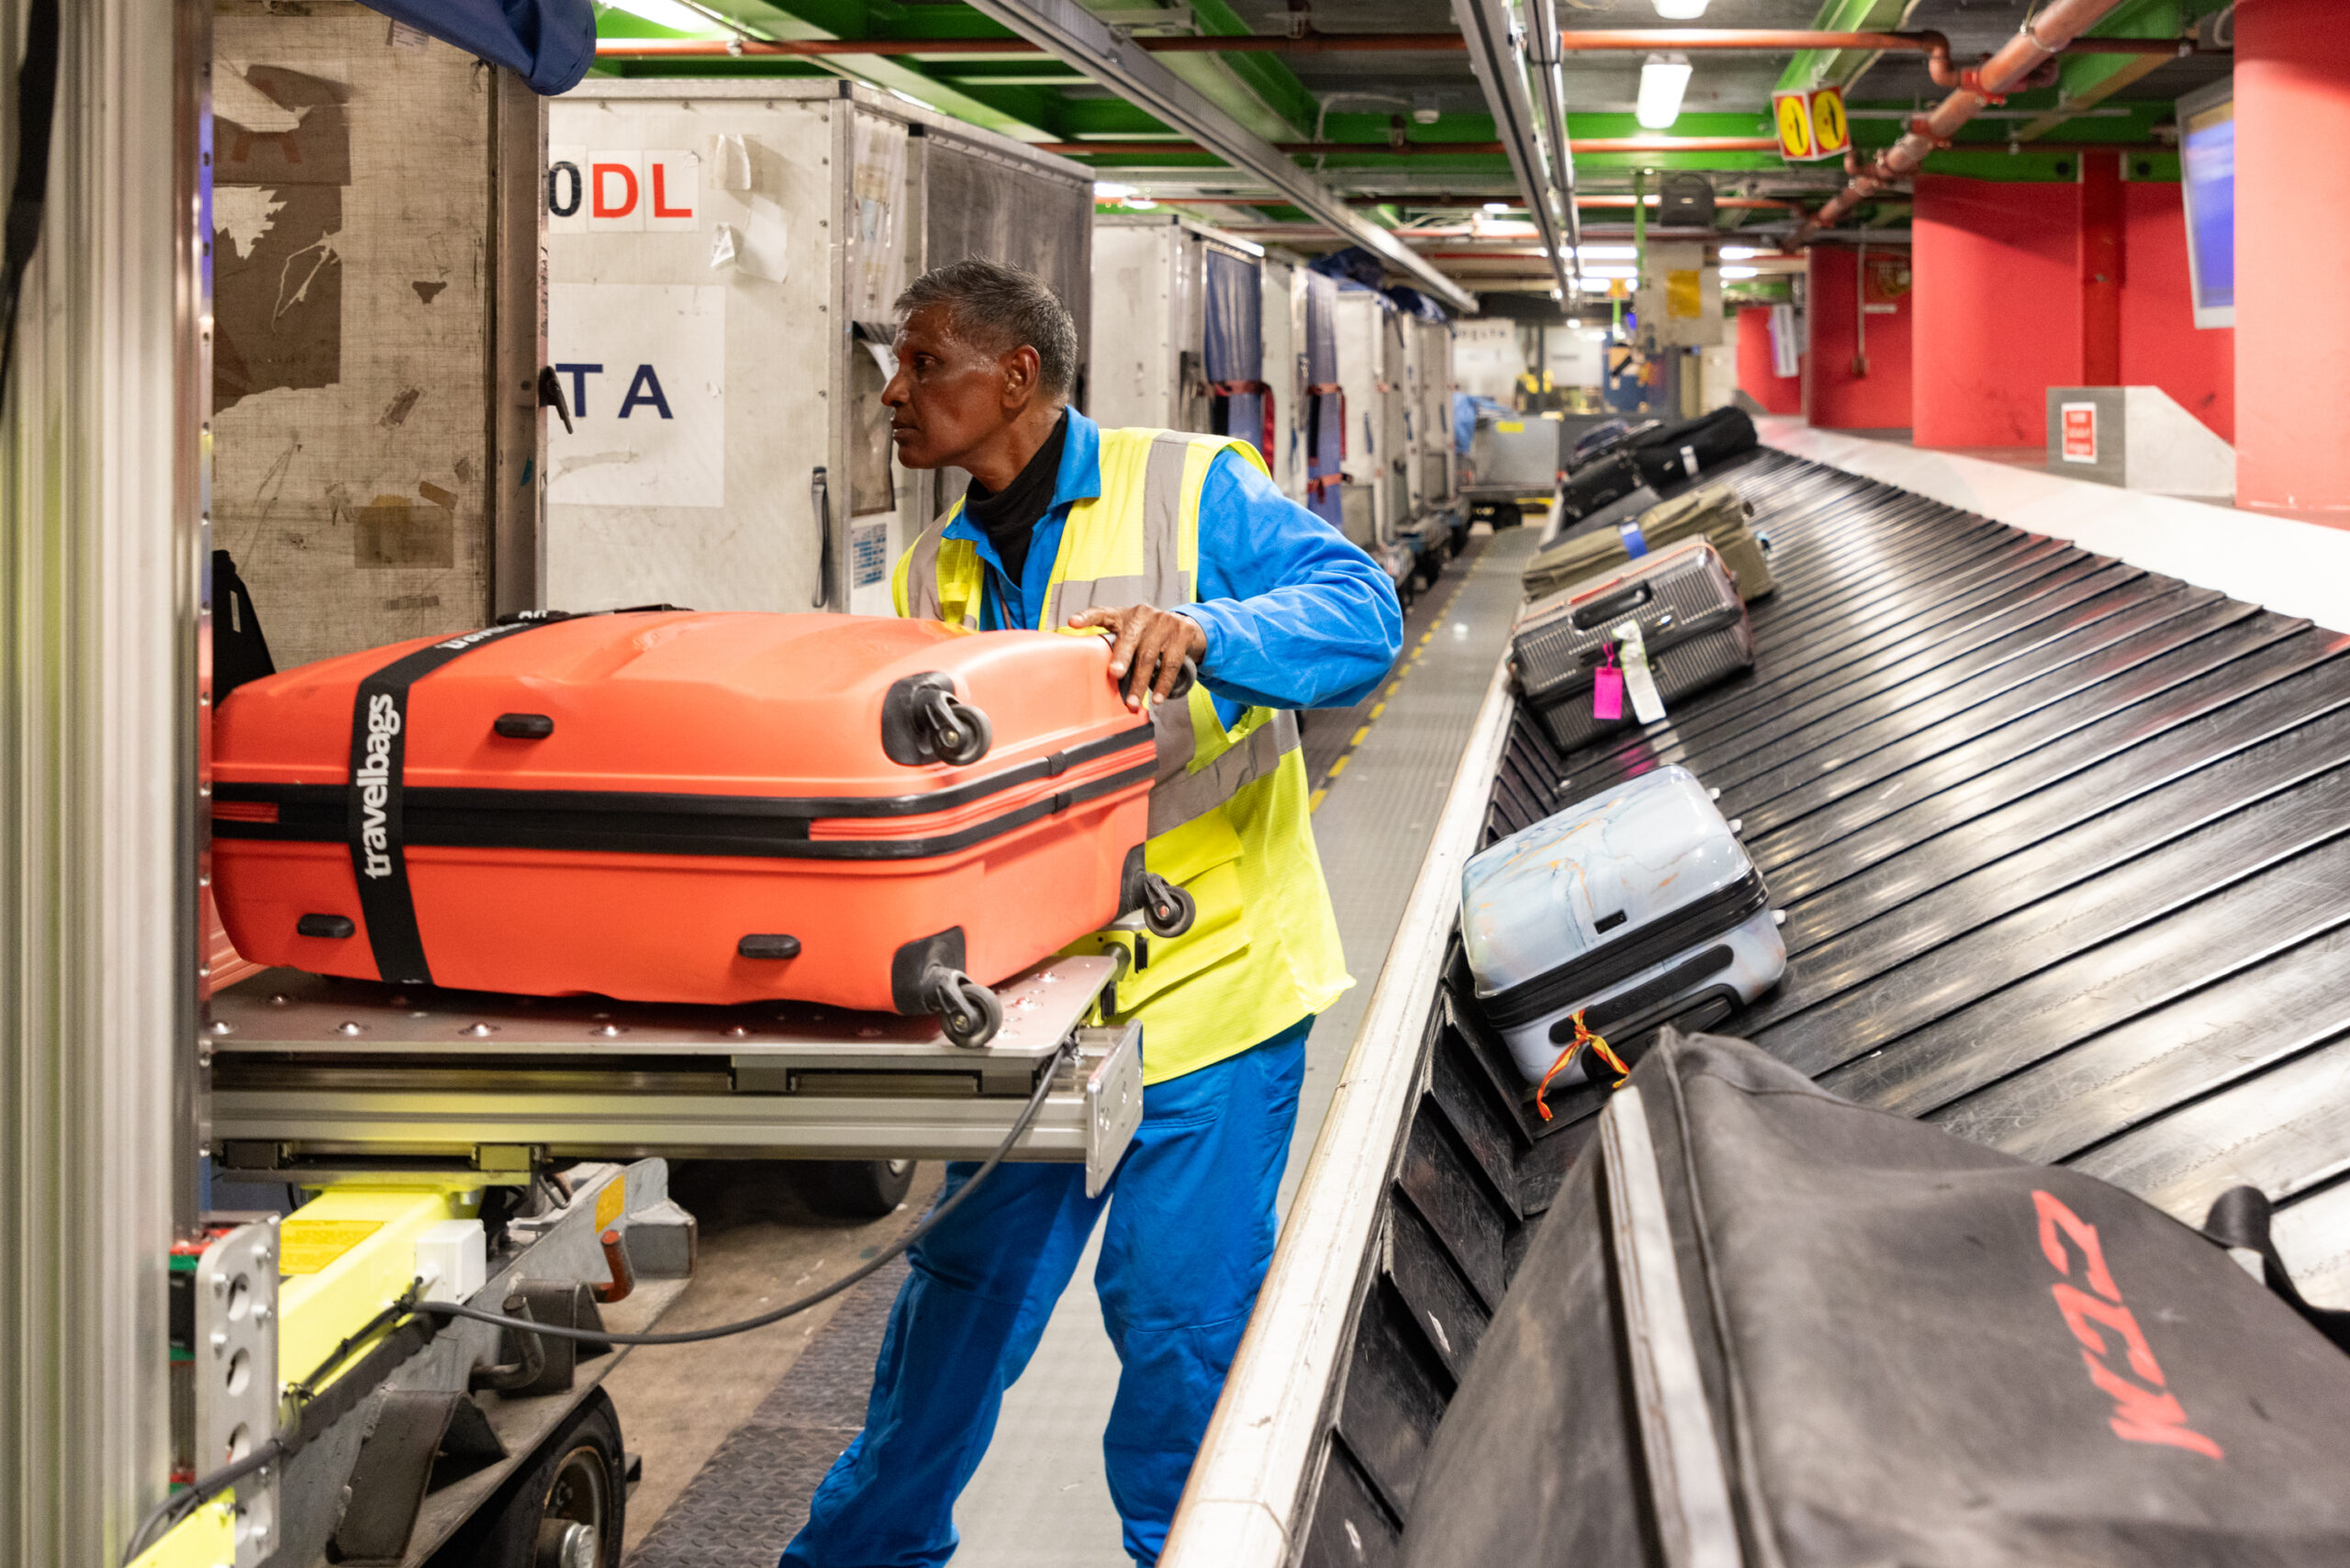 Schiphol is collaborating with baggage handlers to test three new lifting aids